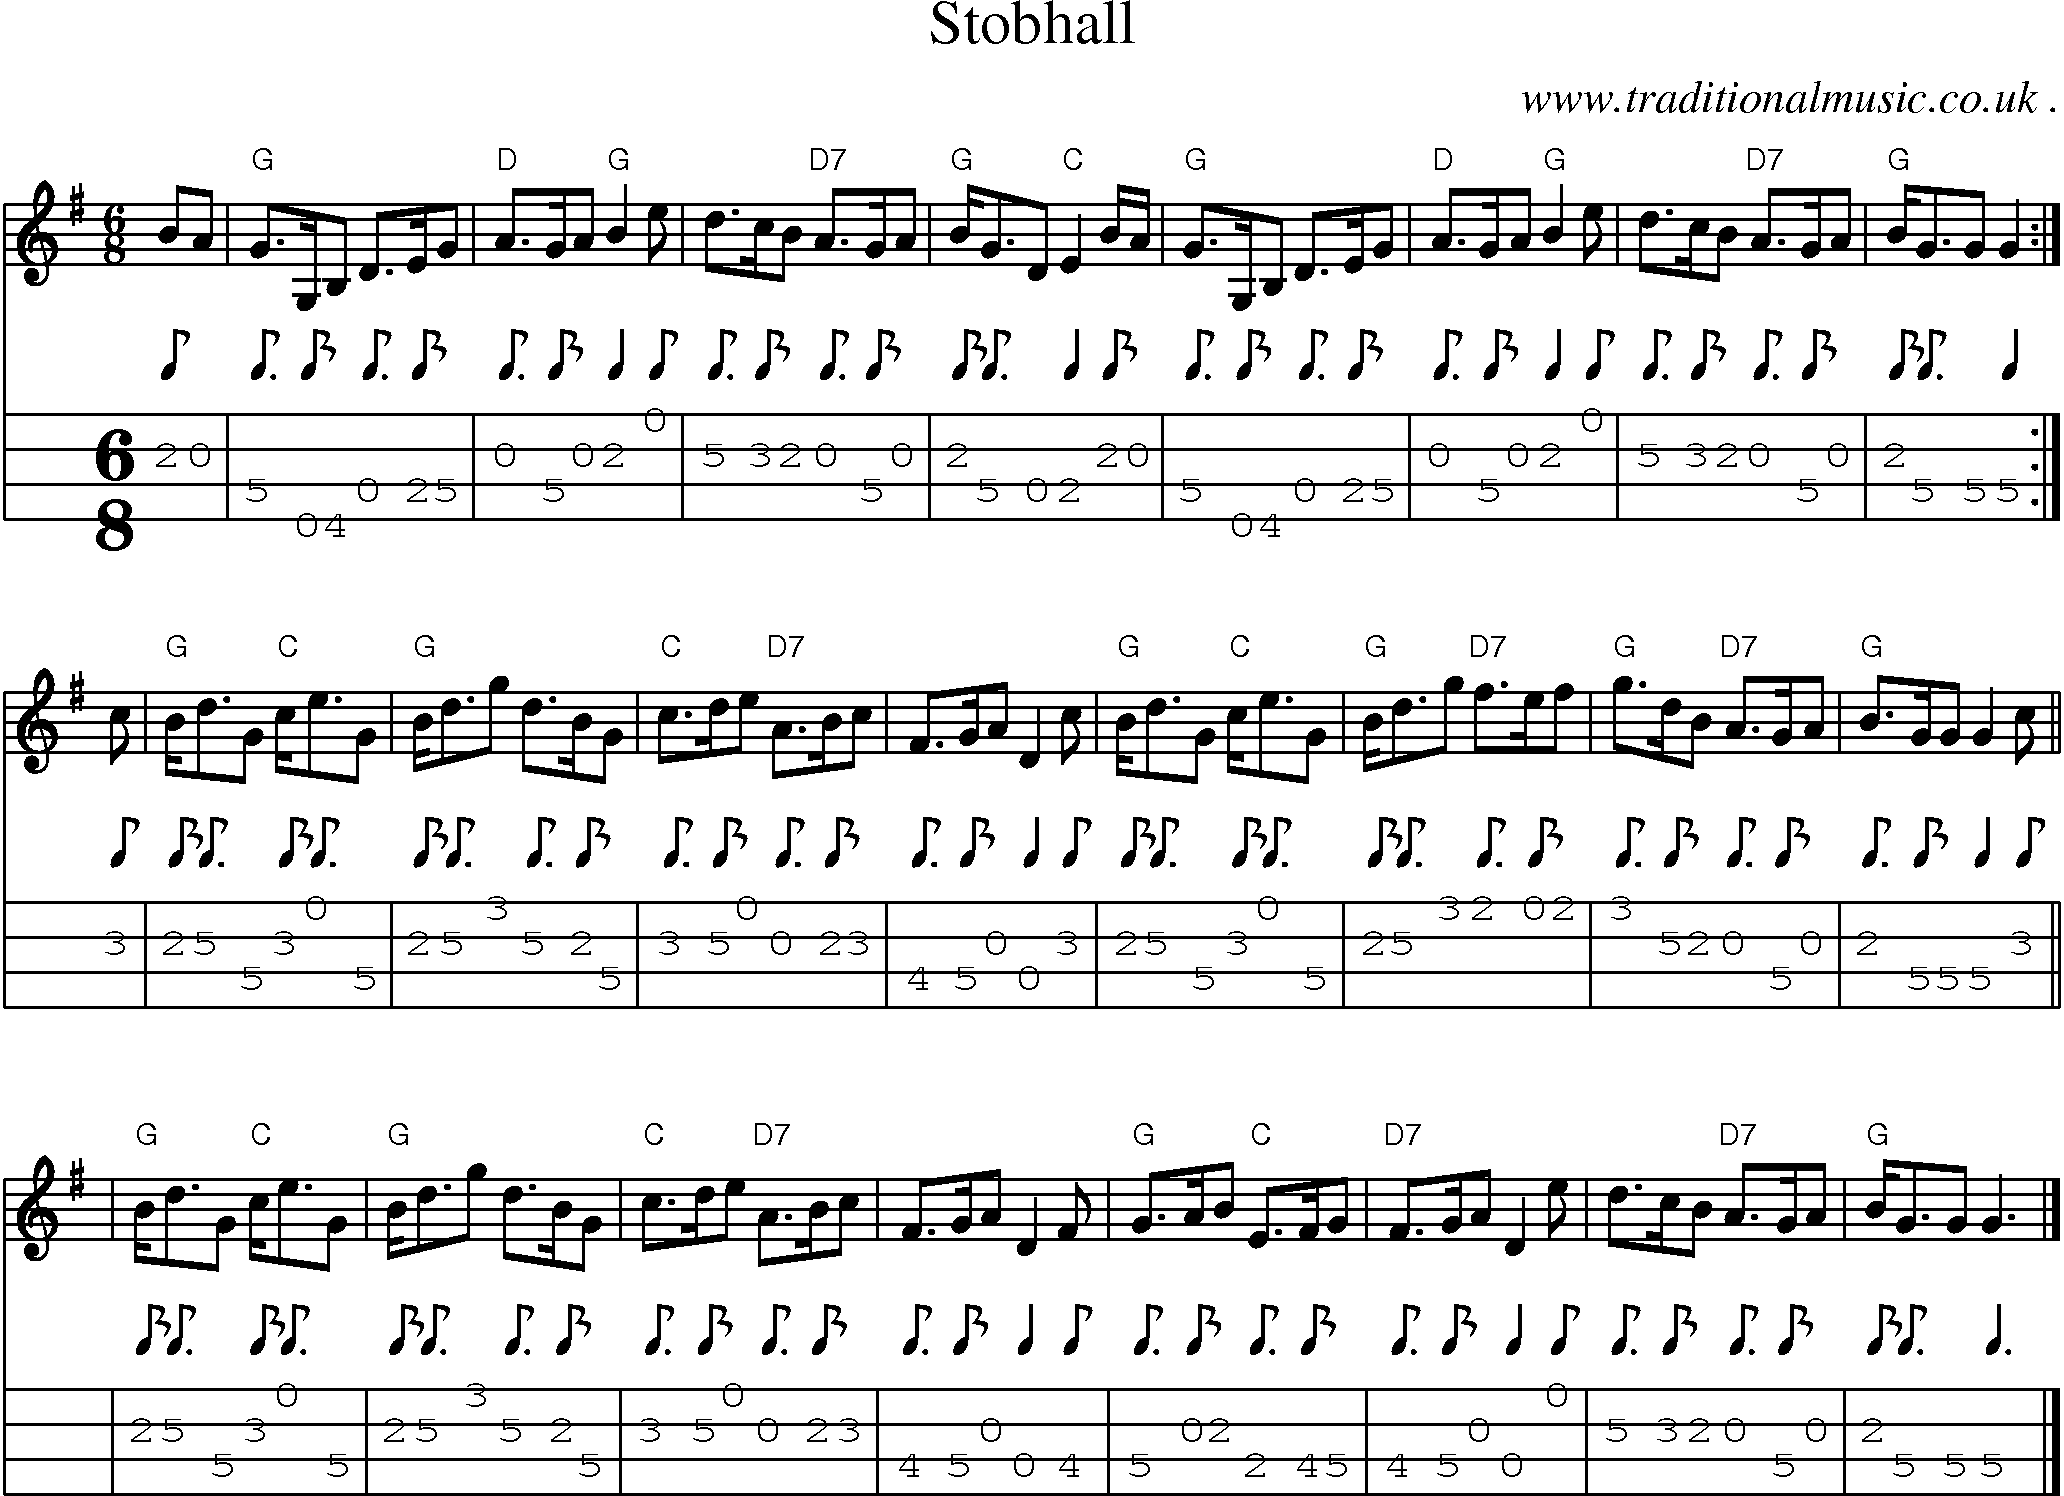 Sheet-music  score, Chords and Mandolin Tabs for Stobhall